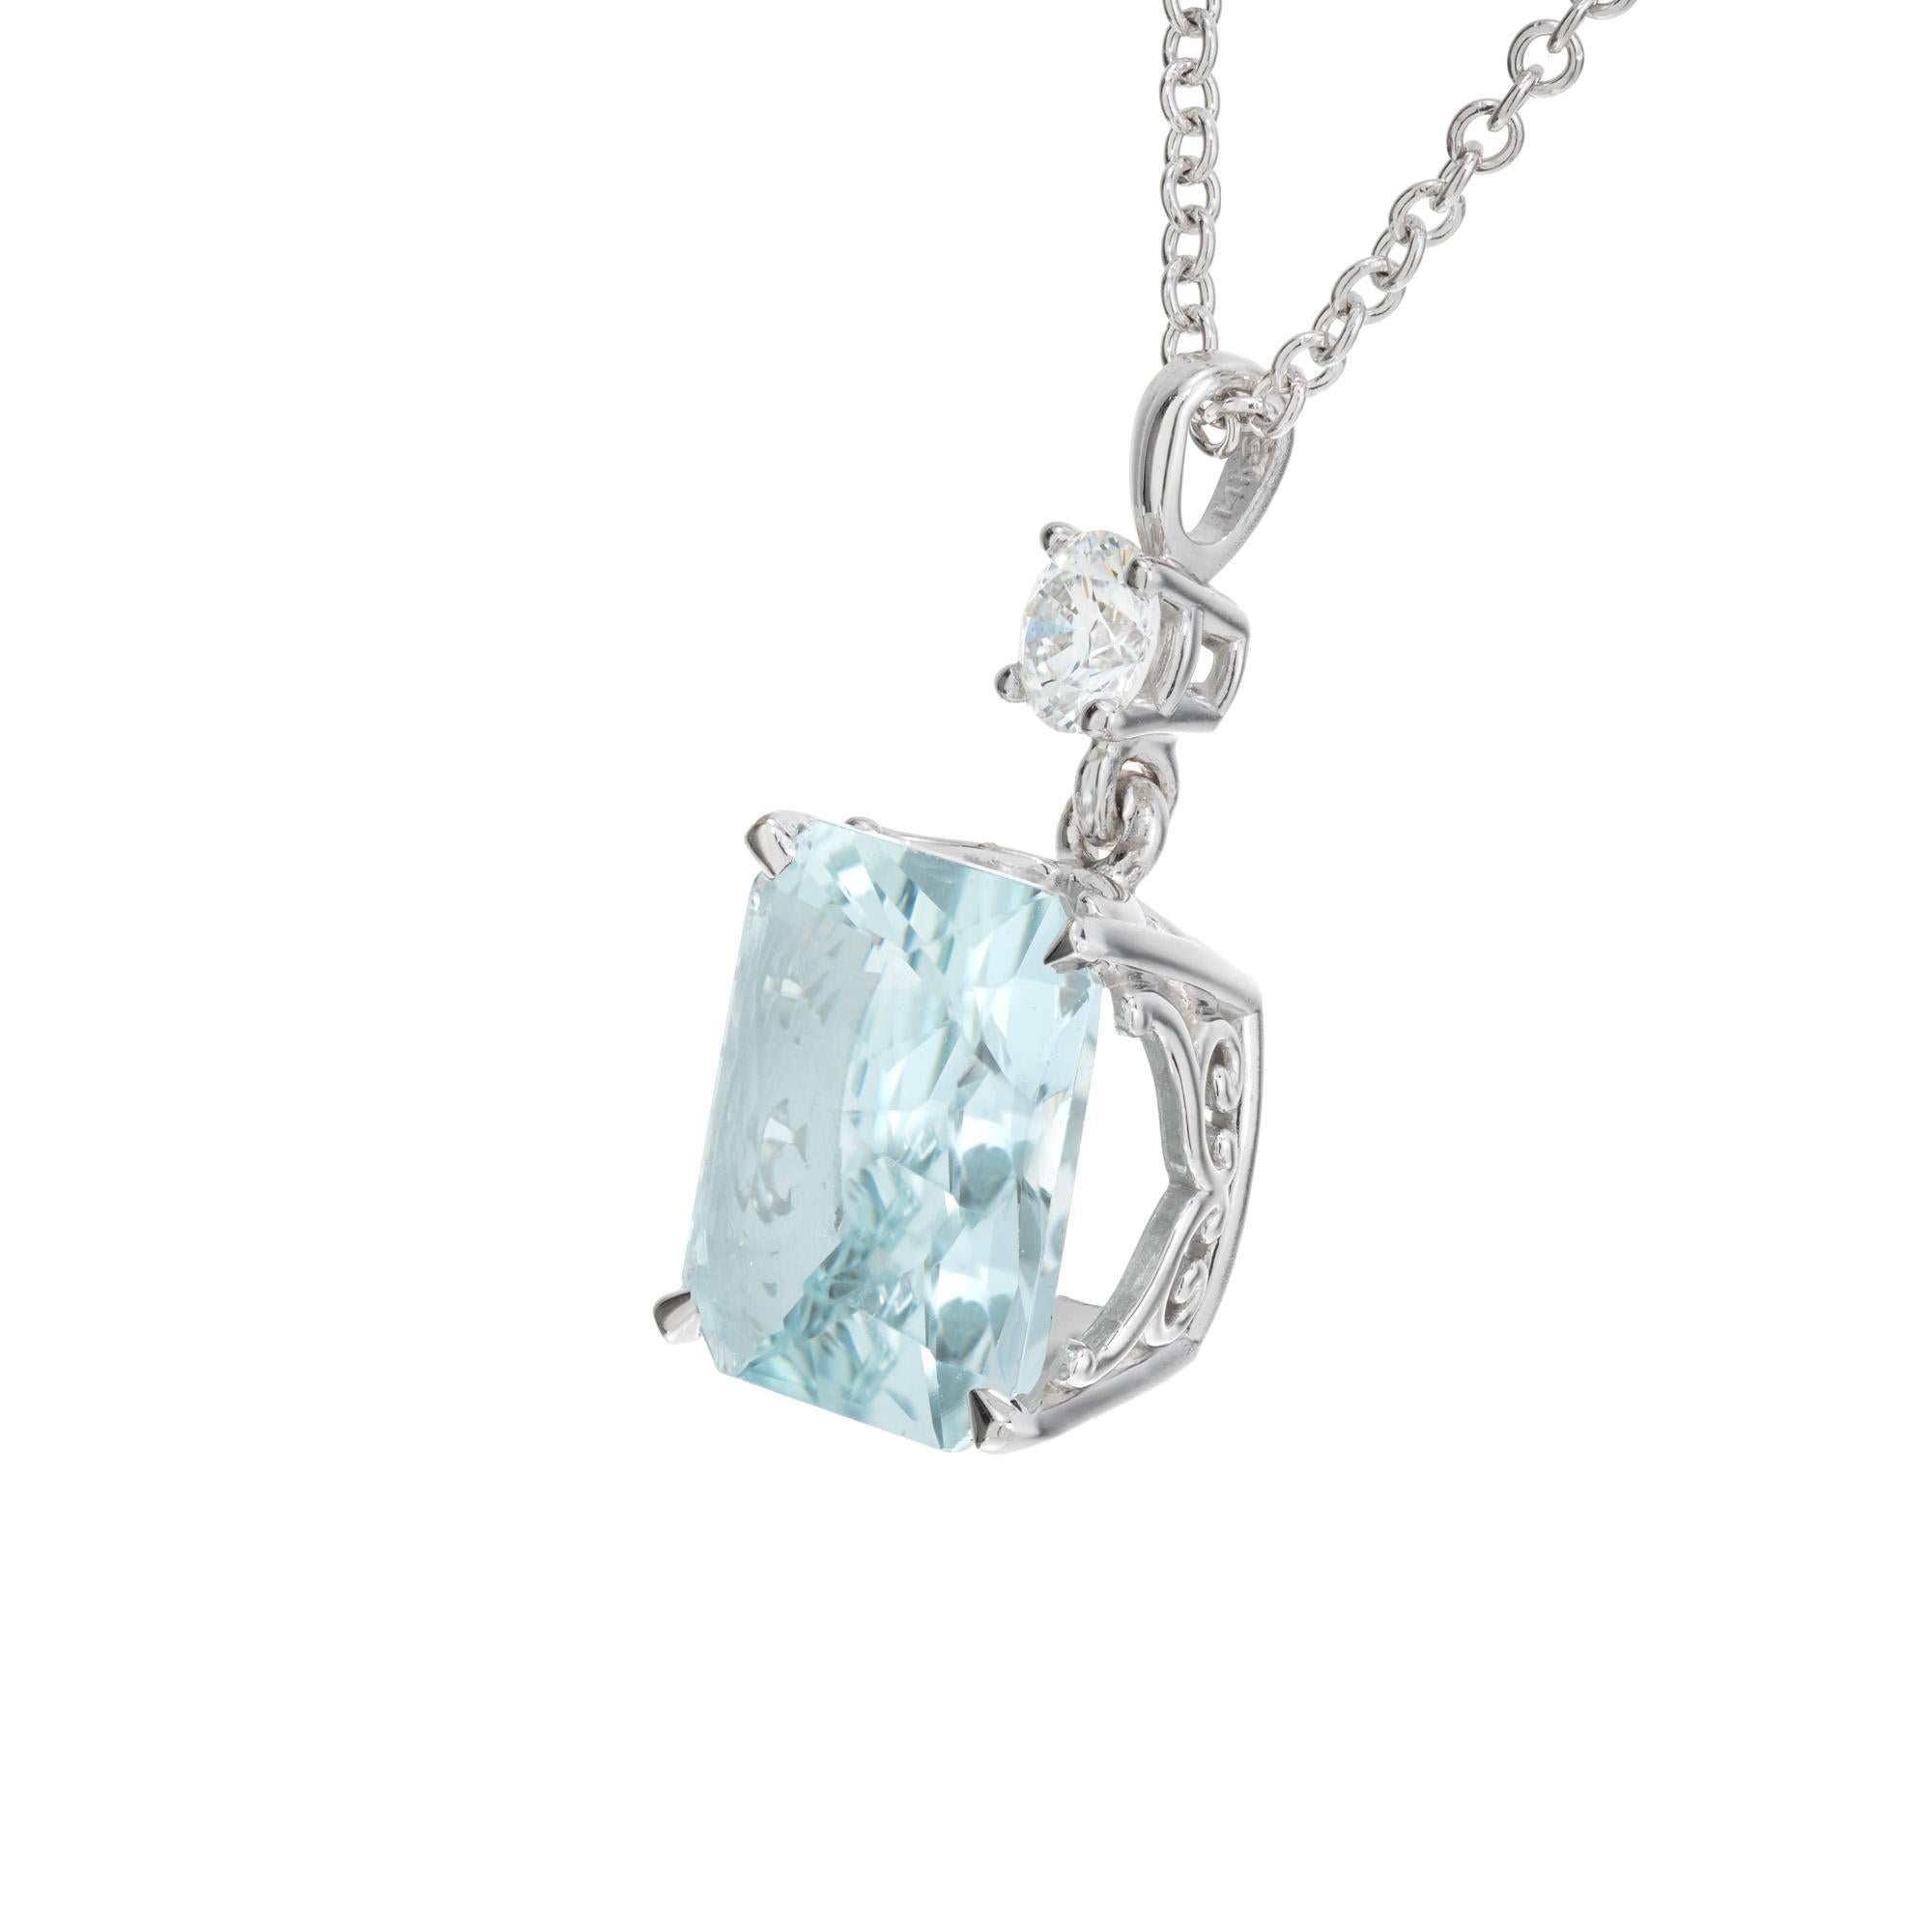 Aqua and diamond pendant necklace. Cushion cut bluish green aquamarine with a round diamond accent on top in a 14k white gold setting. 18 inch 14k white gold chain. Designed and crafted in the Peter Suchy workshop

1 cushion cut blue aquamarine,